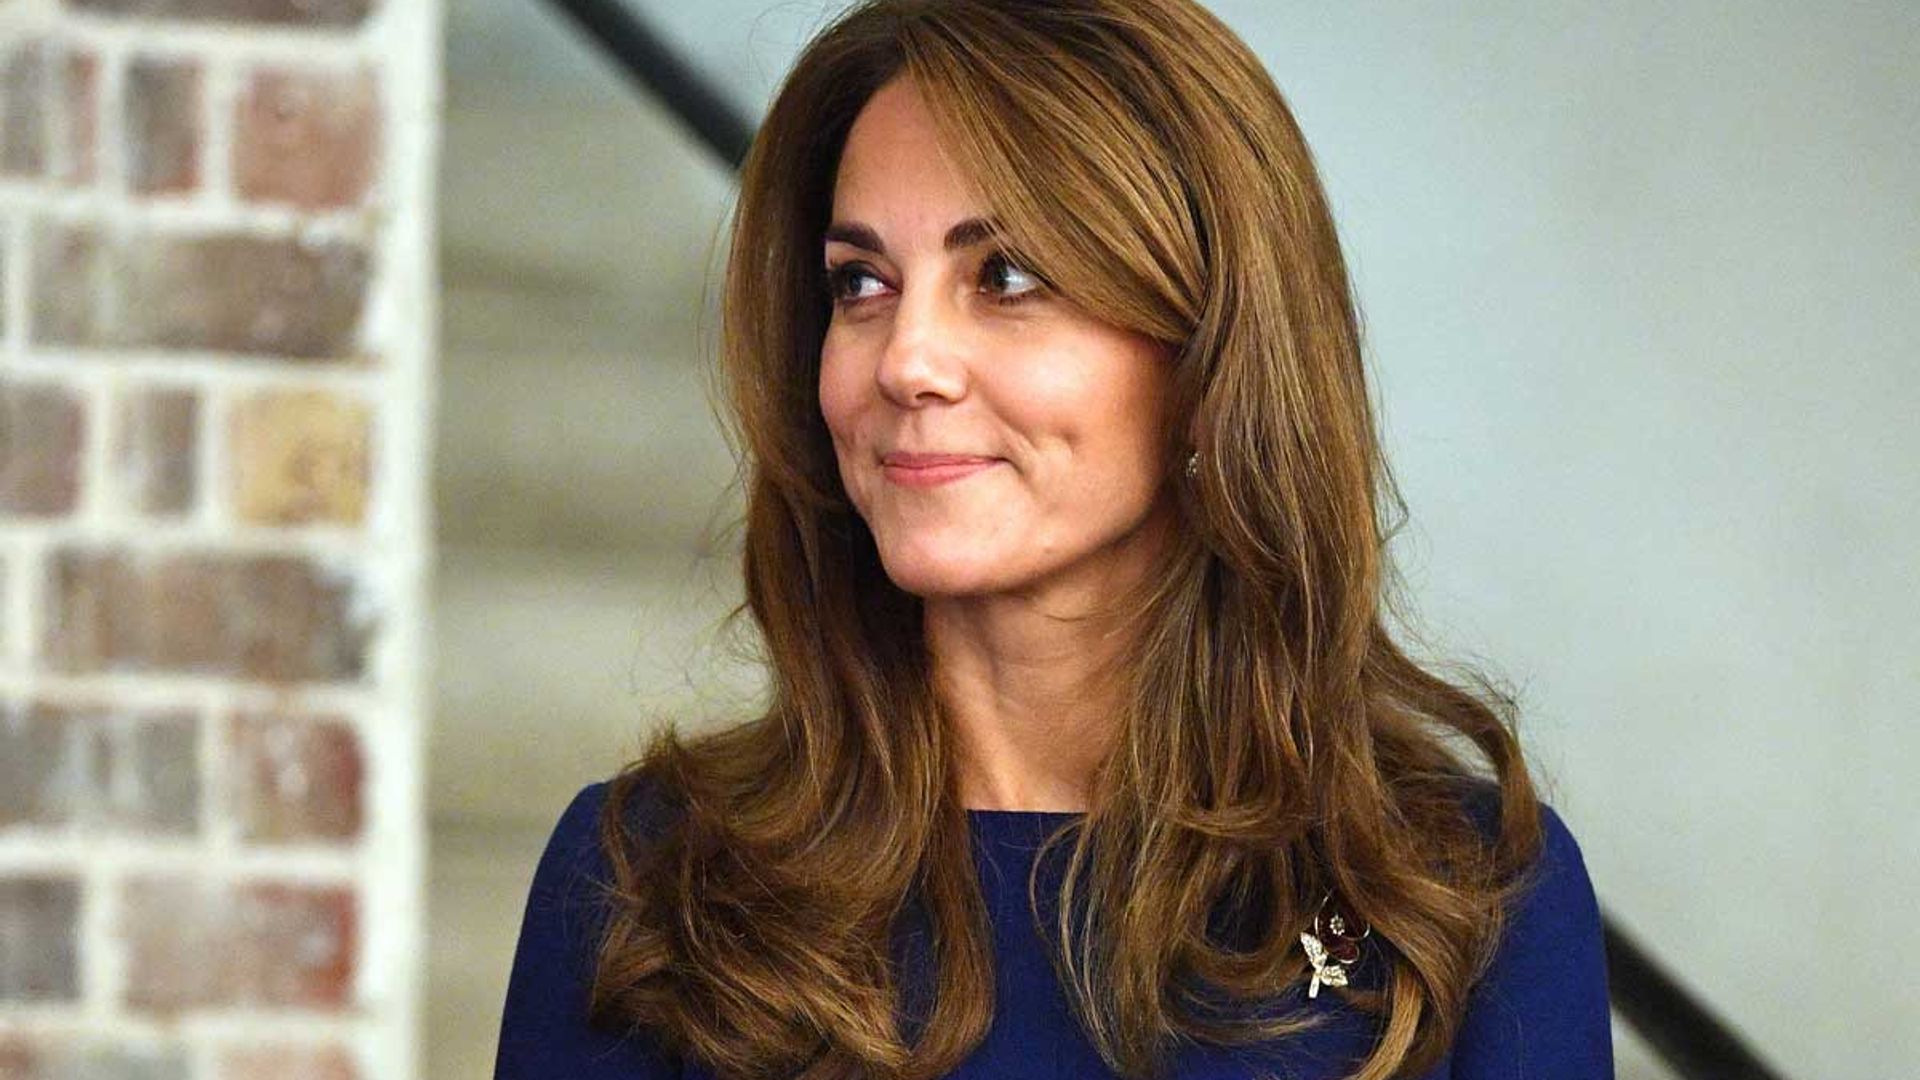 This £70 ASOS dress looks like one worn by the Duchess of Cambridge